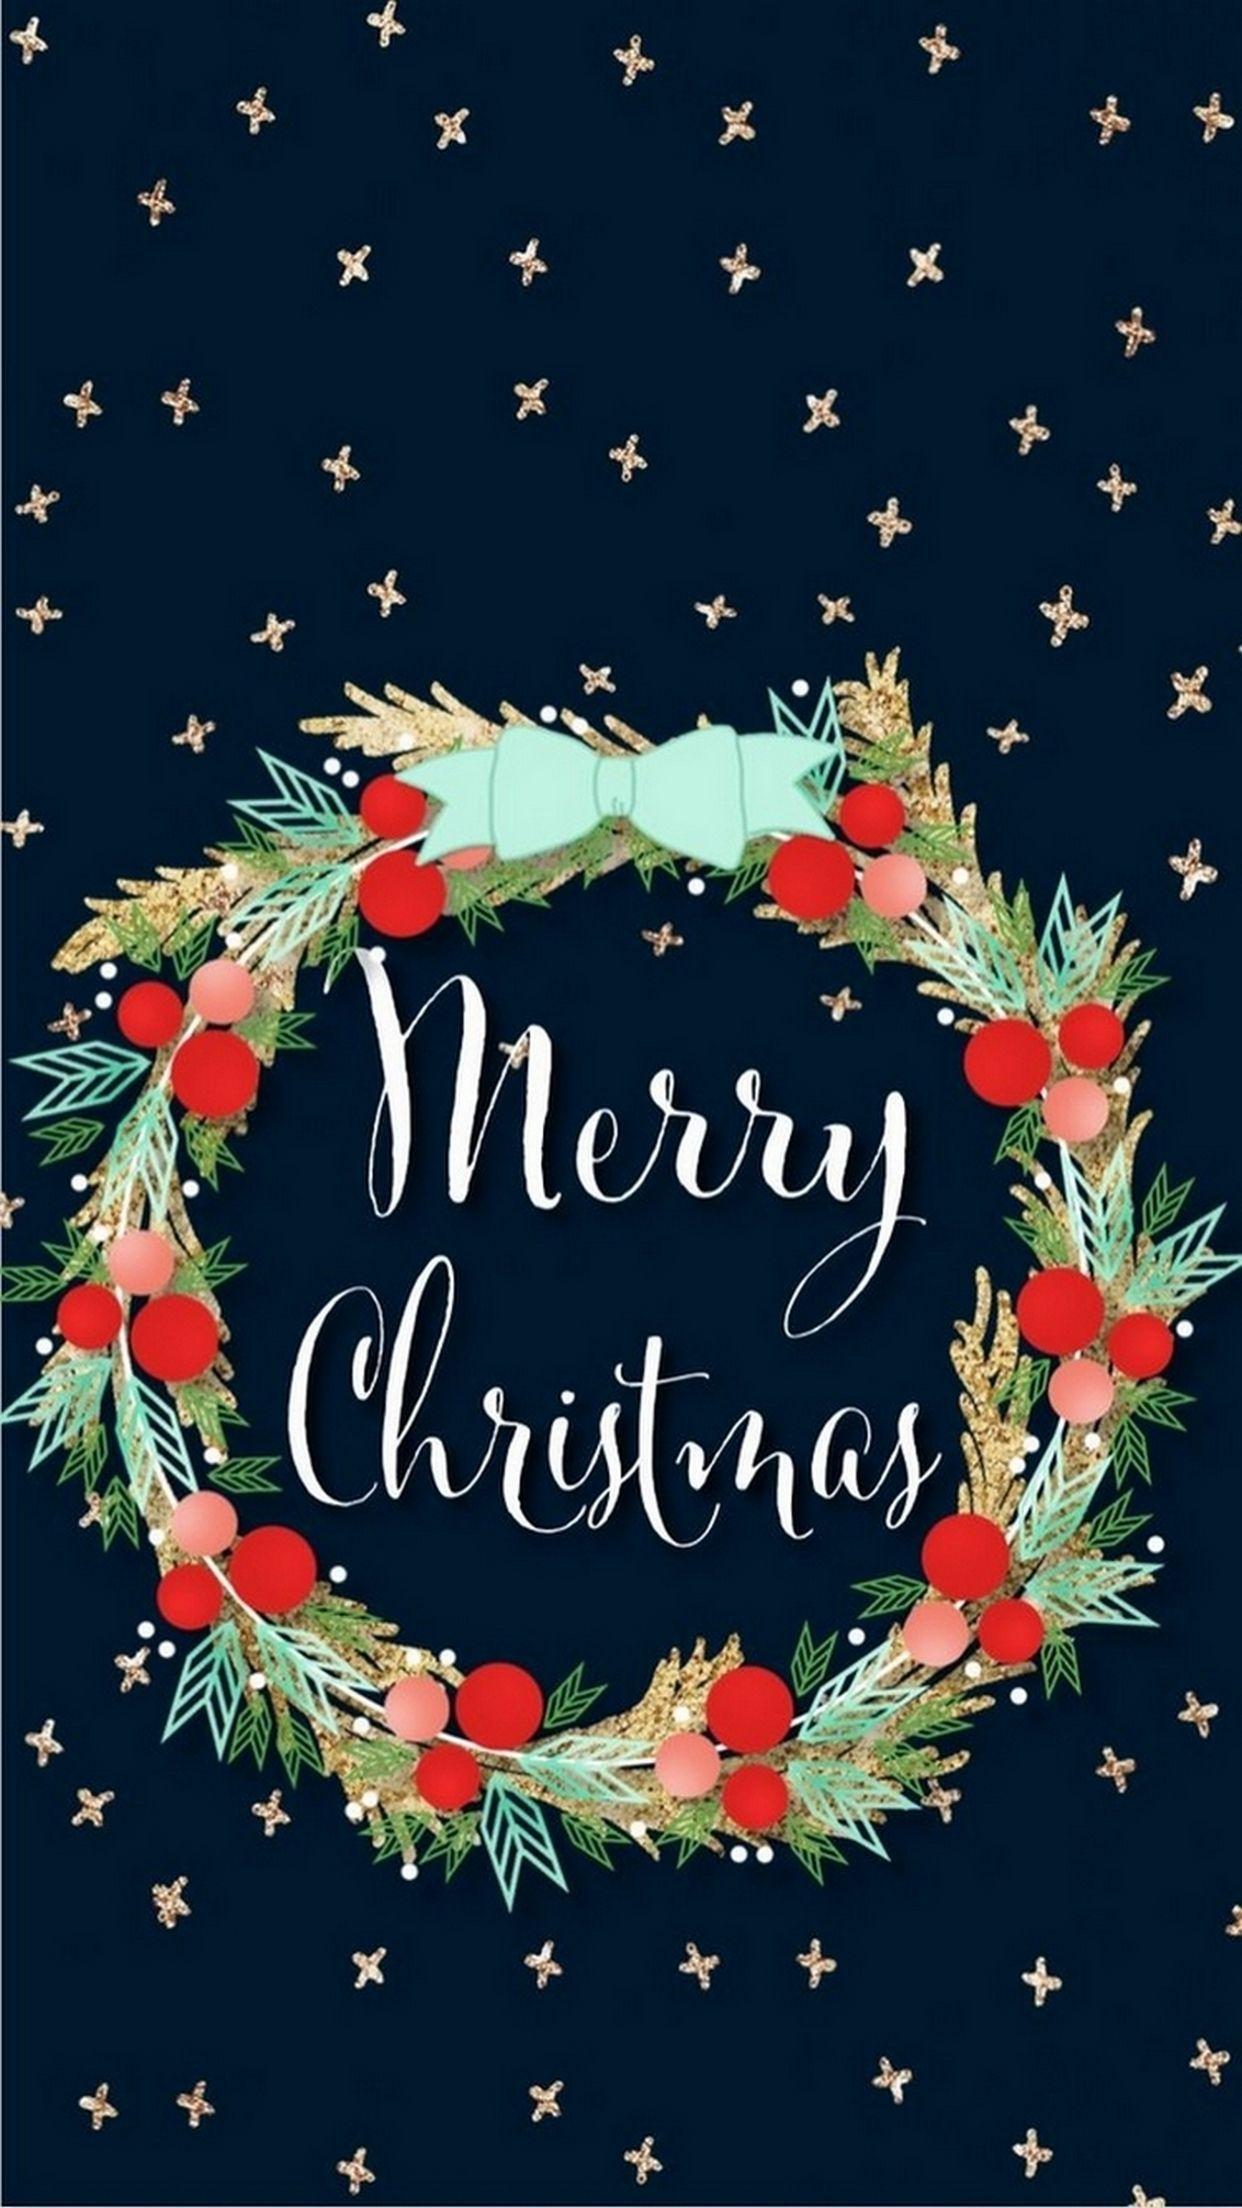 Merry Christmas iPhone Wallpaper Free Merry Christmas iPhone Background